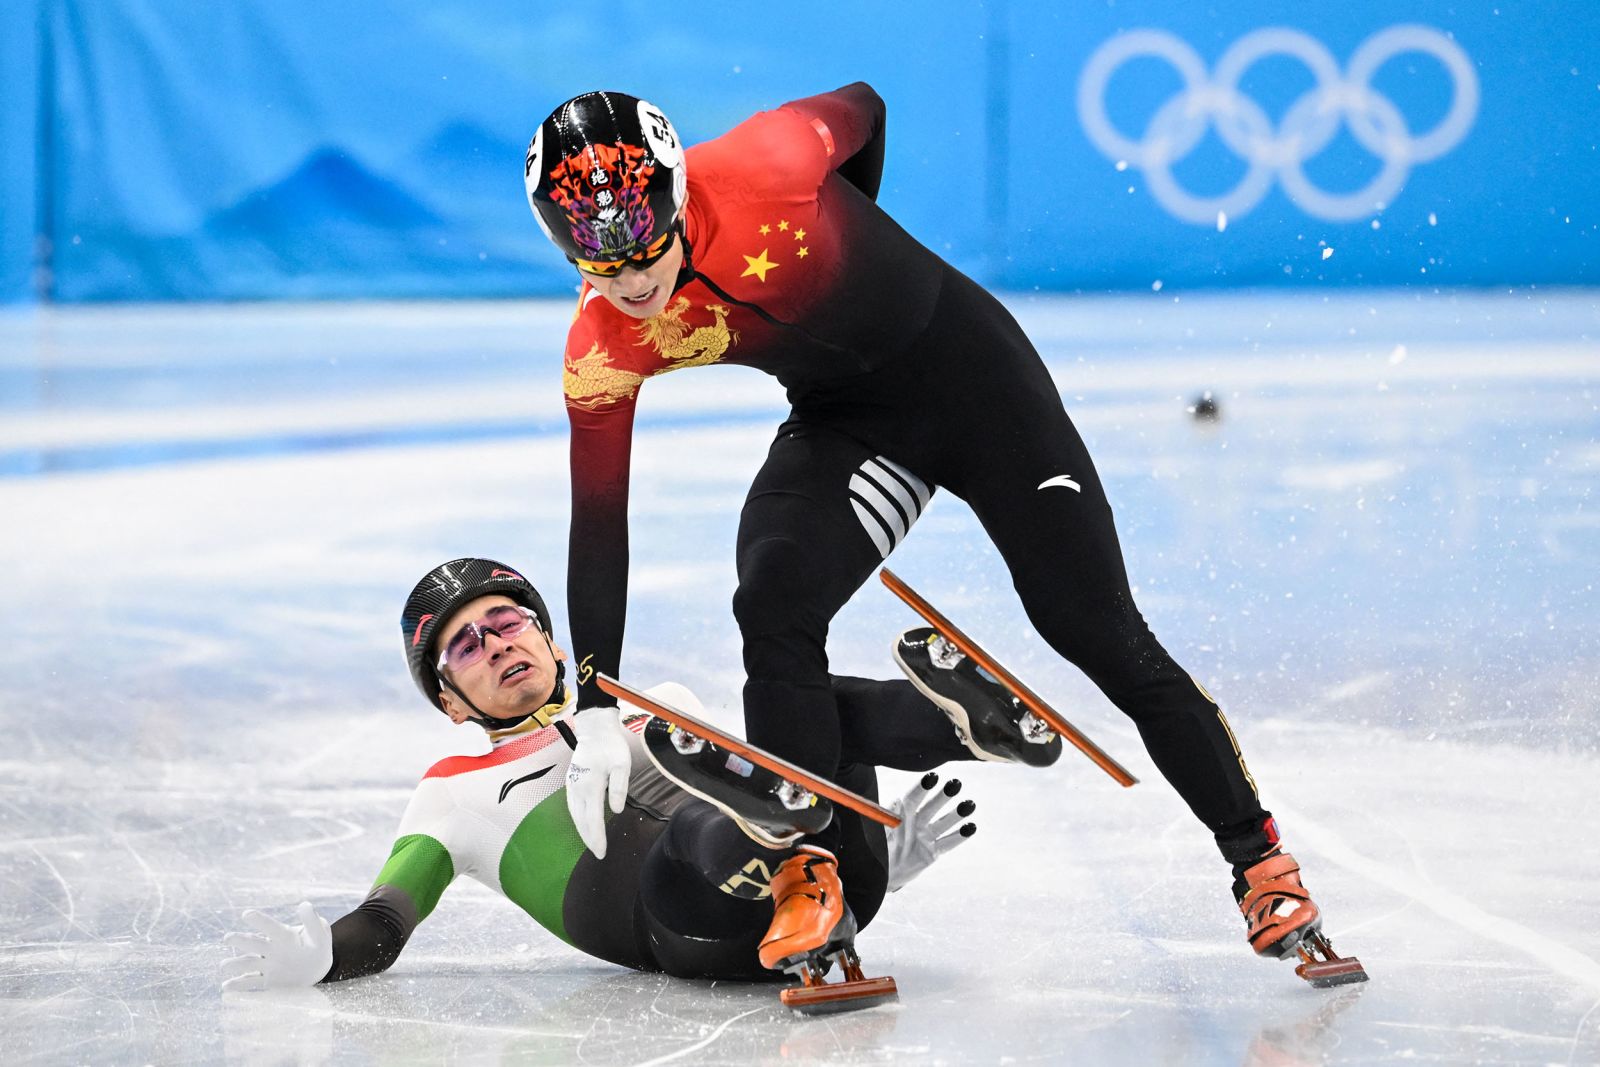 Eileen Gu Bows to Chinese Crowd After Winning Olympic Gold on Last Run